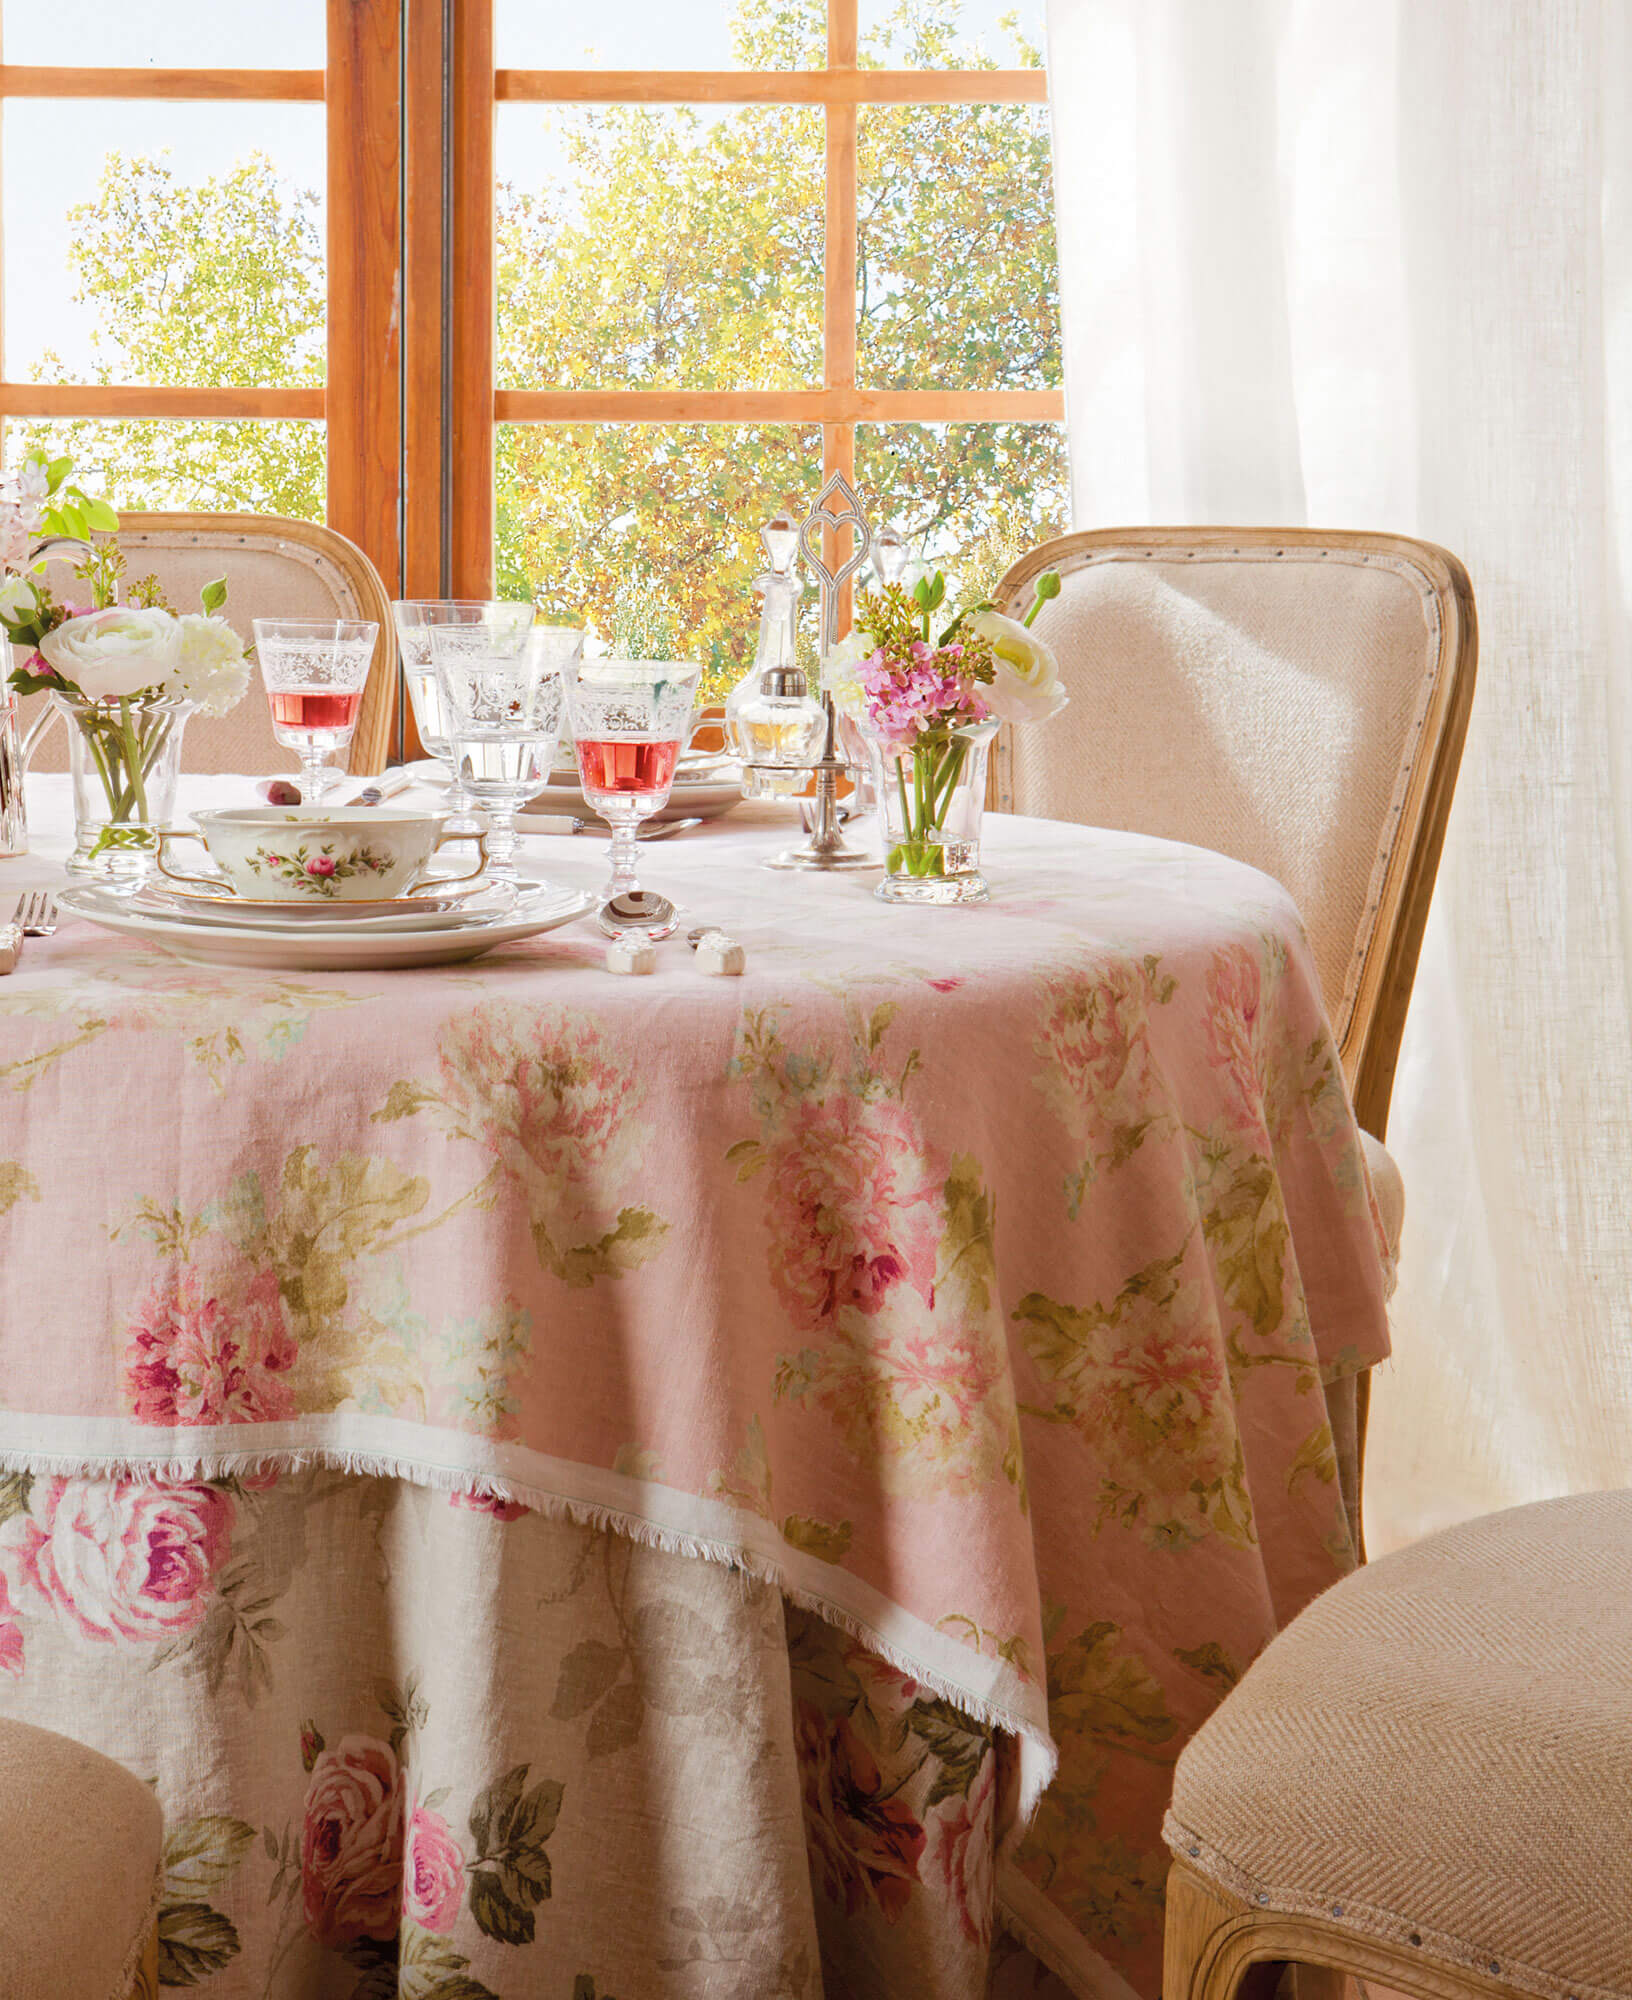 3. DOUBLE TABLECLOTH